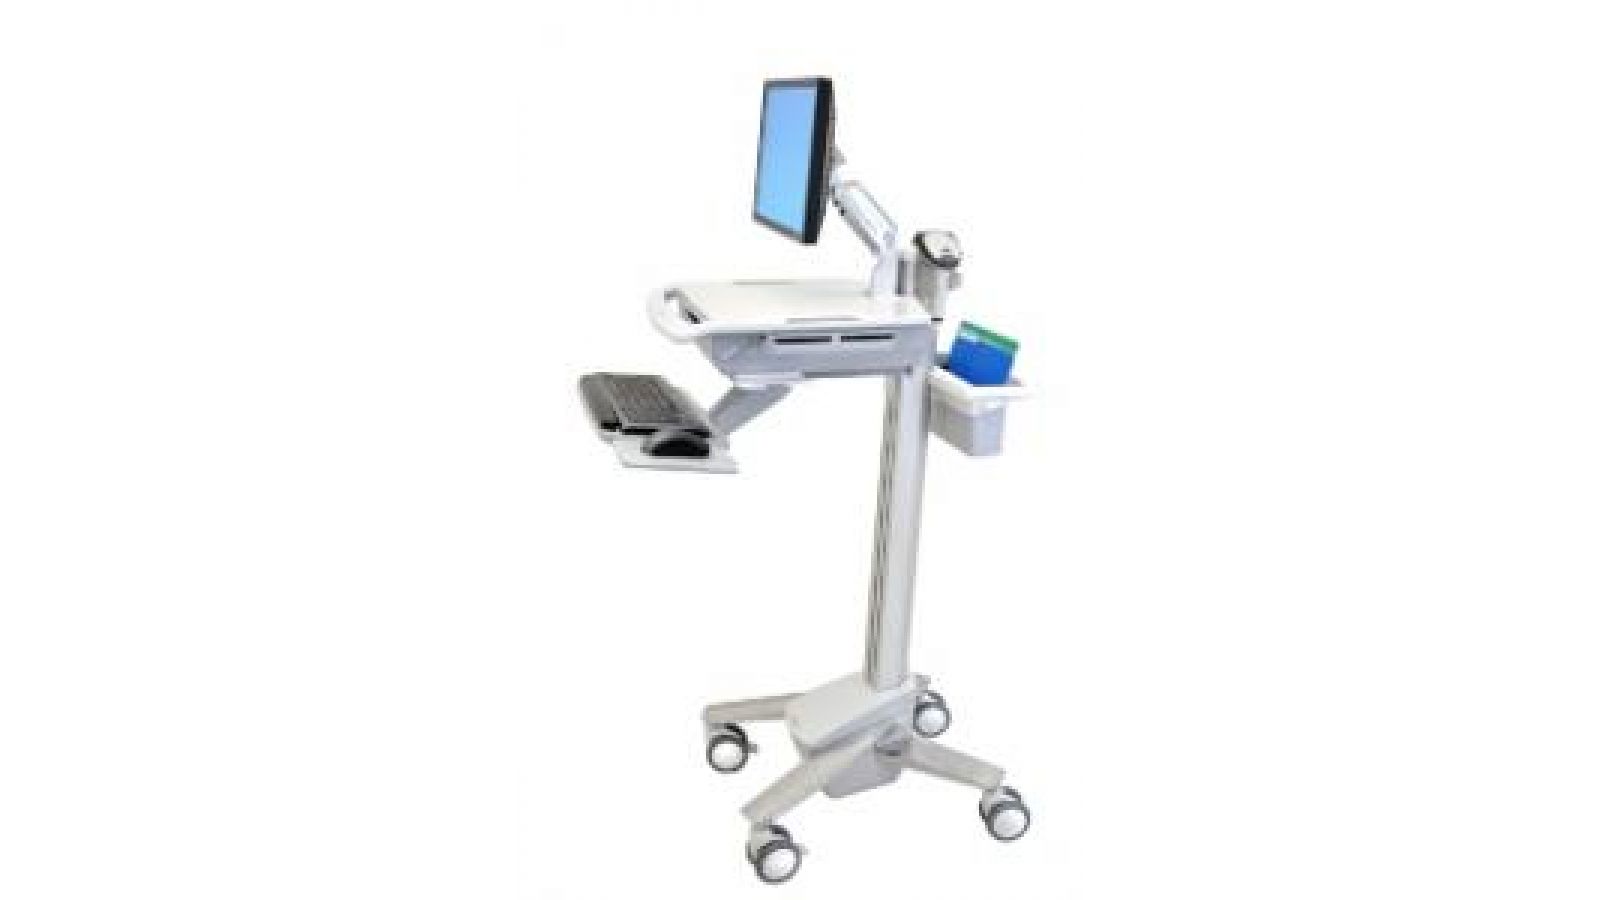 StyleView EMR Cart with LCD Arm